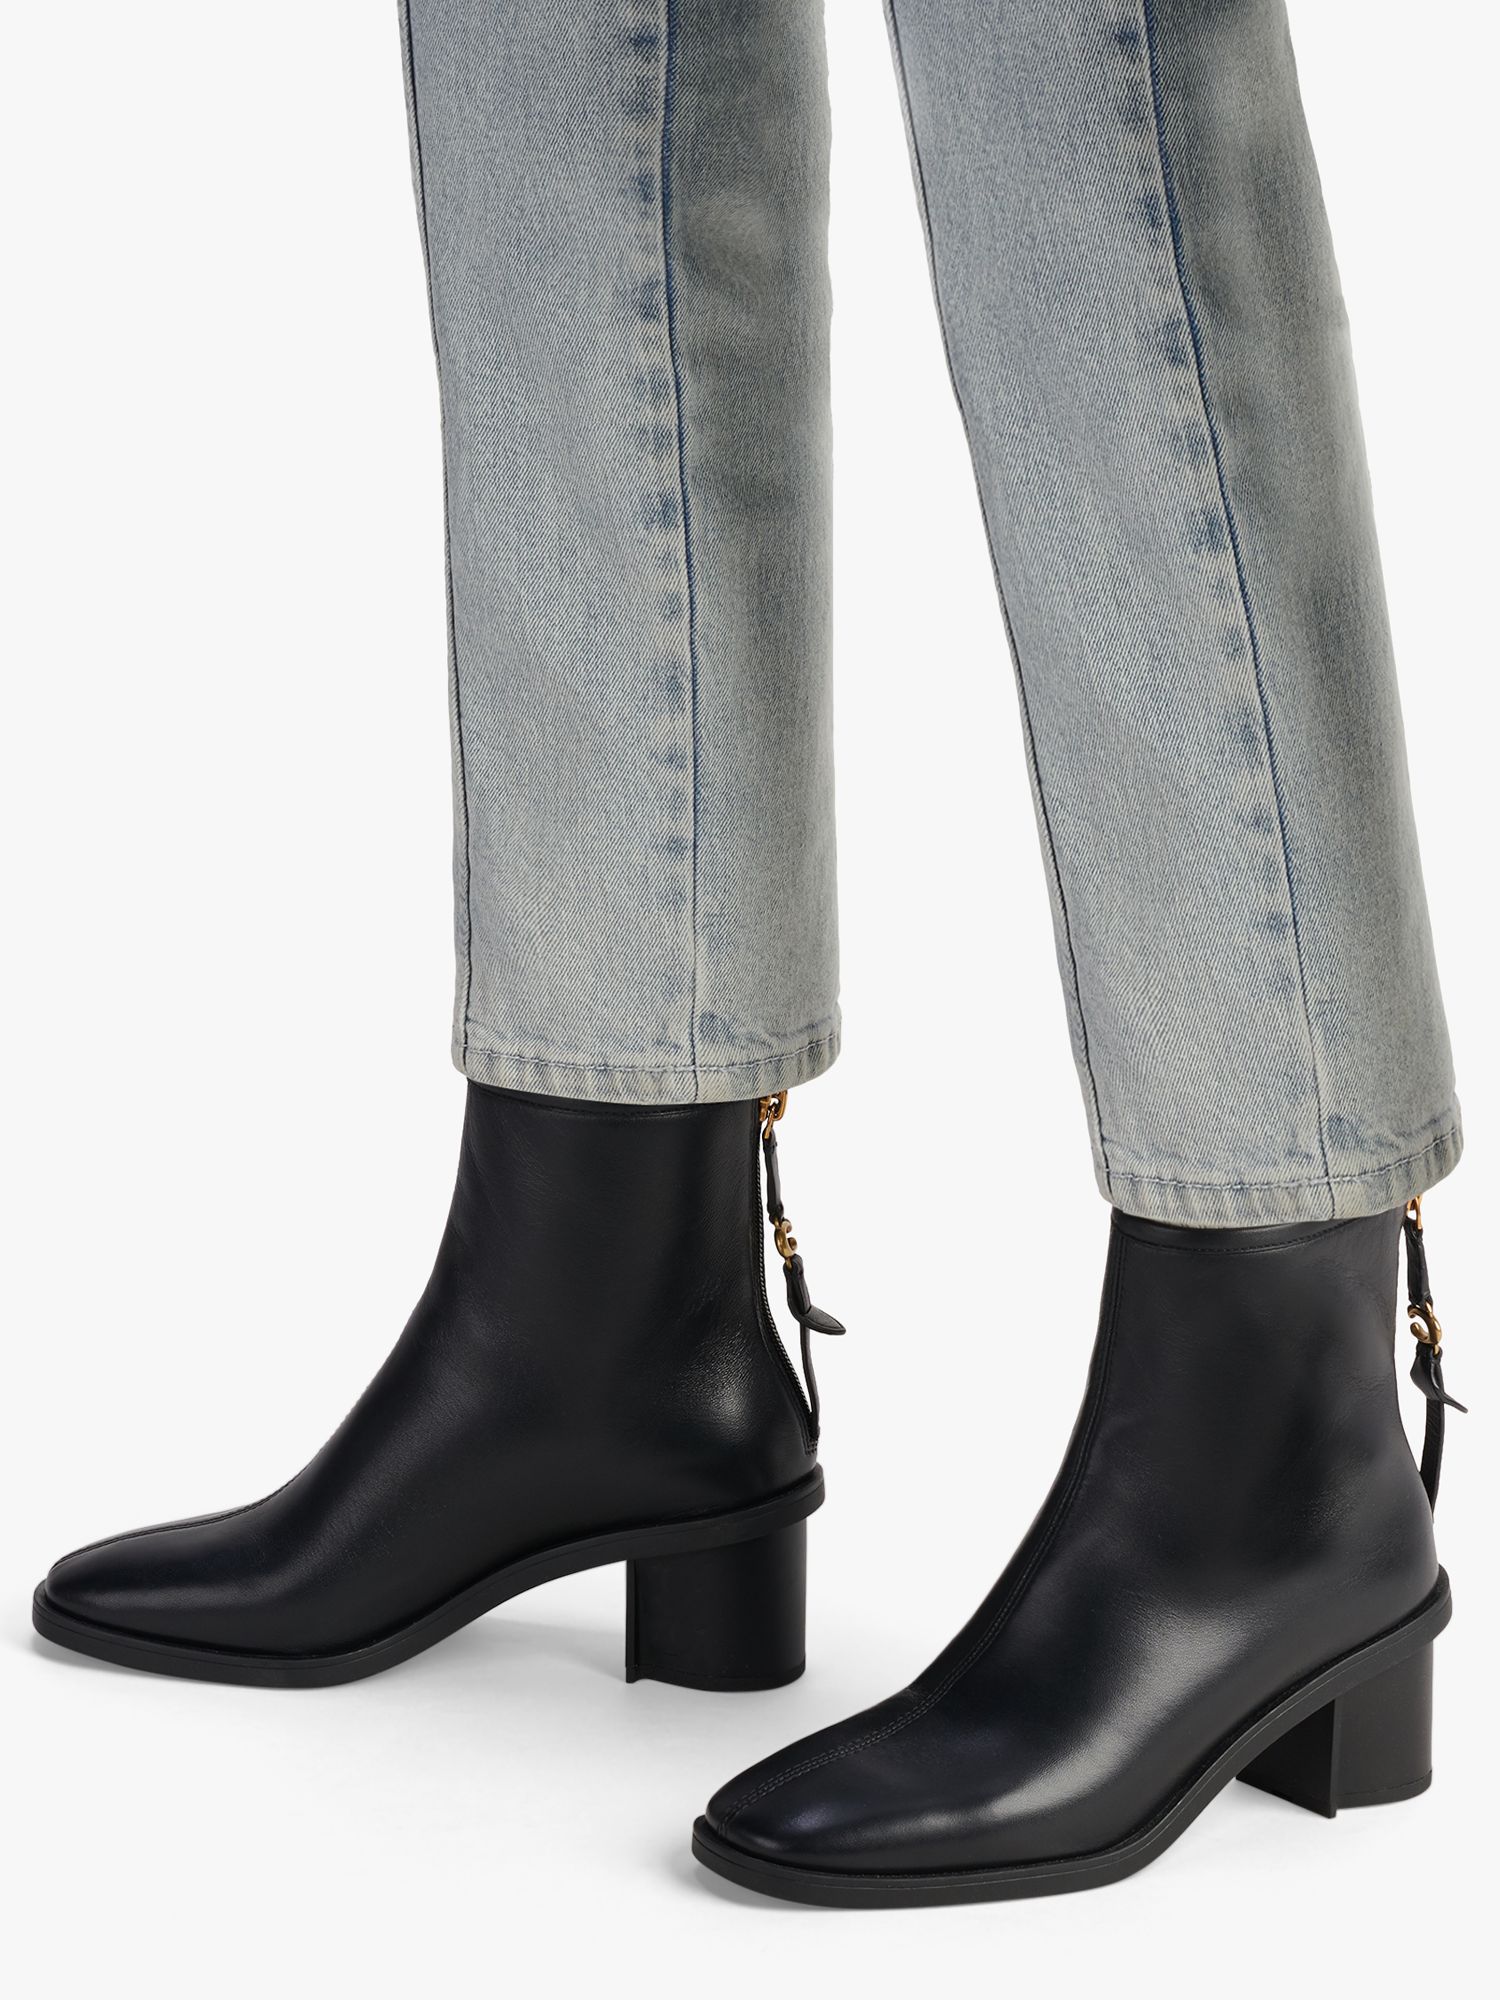 Coach Gabi Leather Ankle Boots